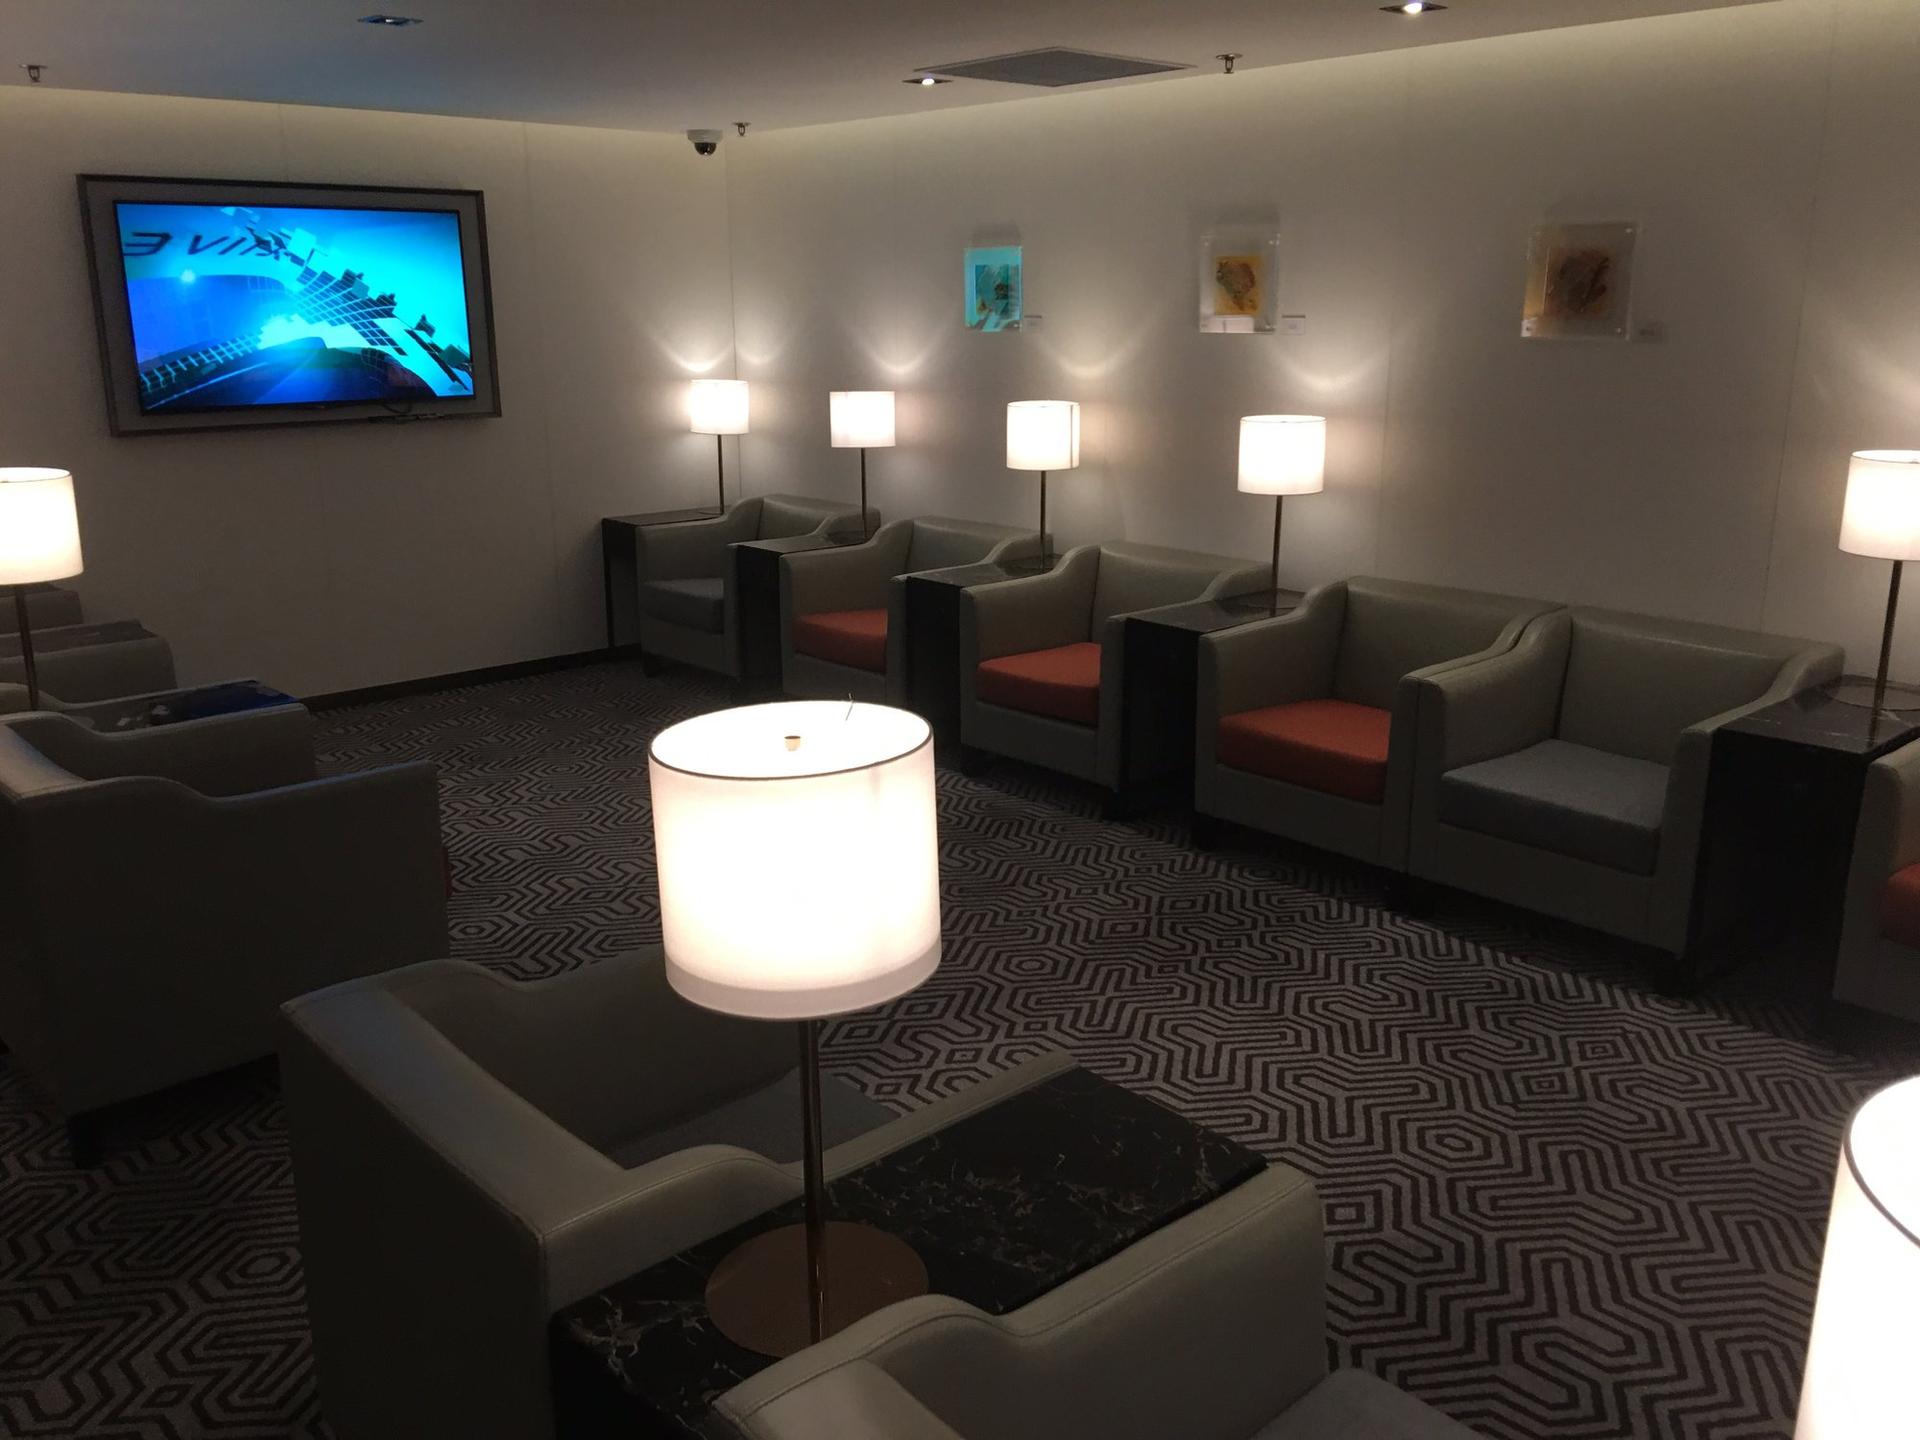 Singapore Airlines SilverKris Business Class Lounge image 24 of 68